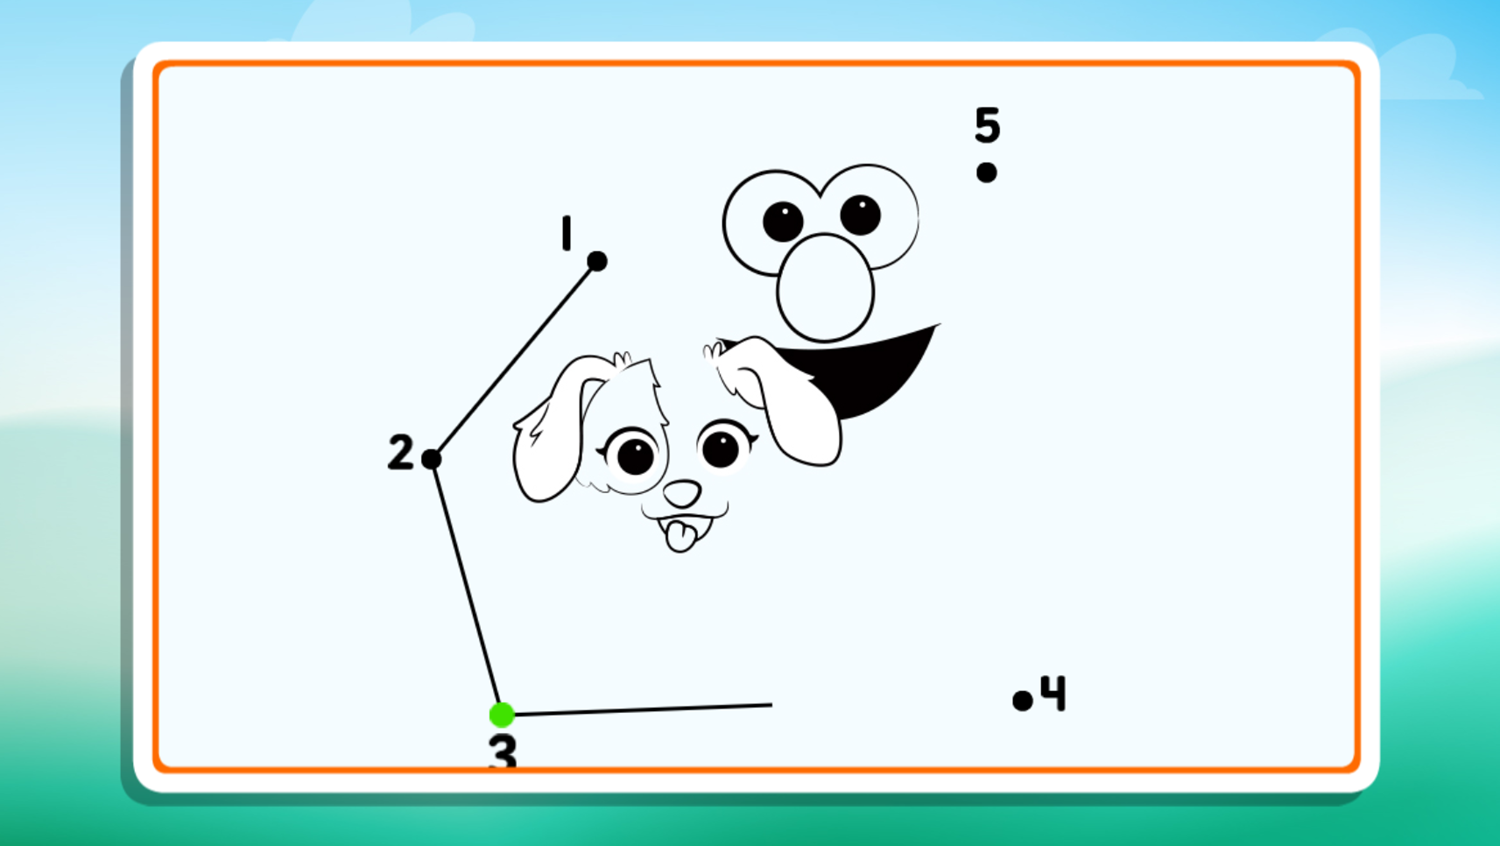 Sesame Street Furry Friends Forever Connect the Dots Game Level Play Screenshot.